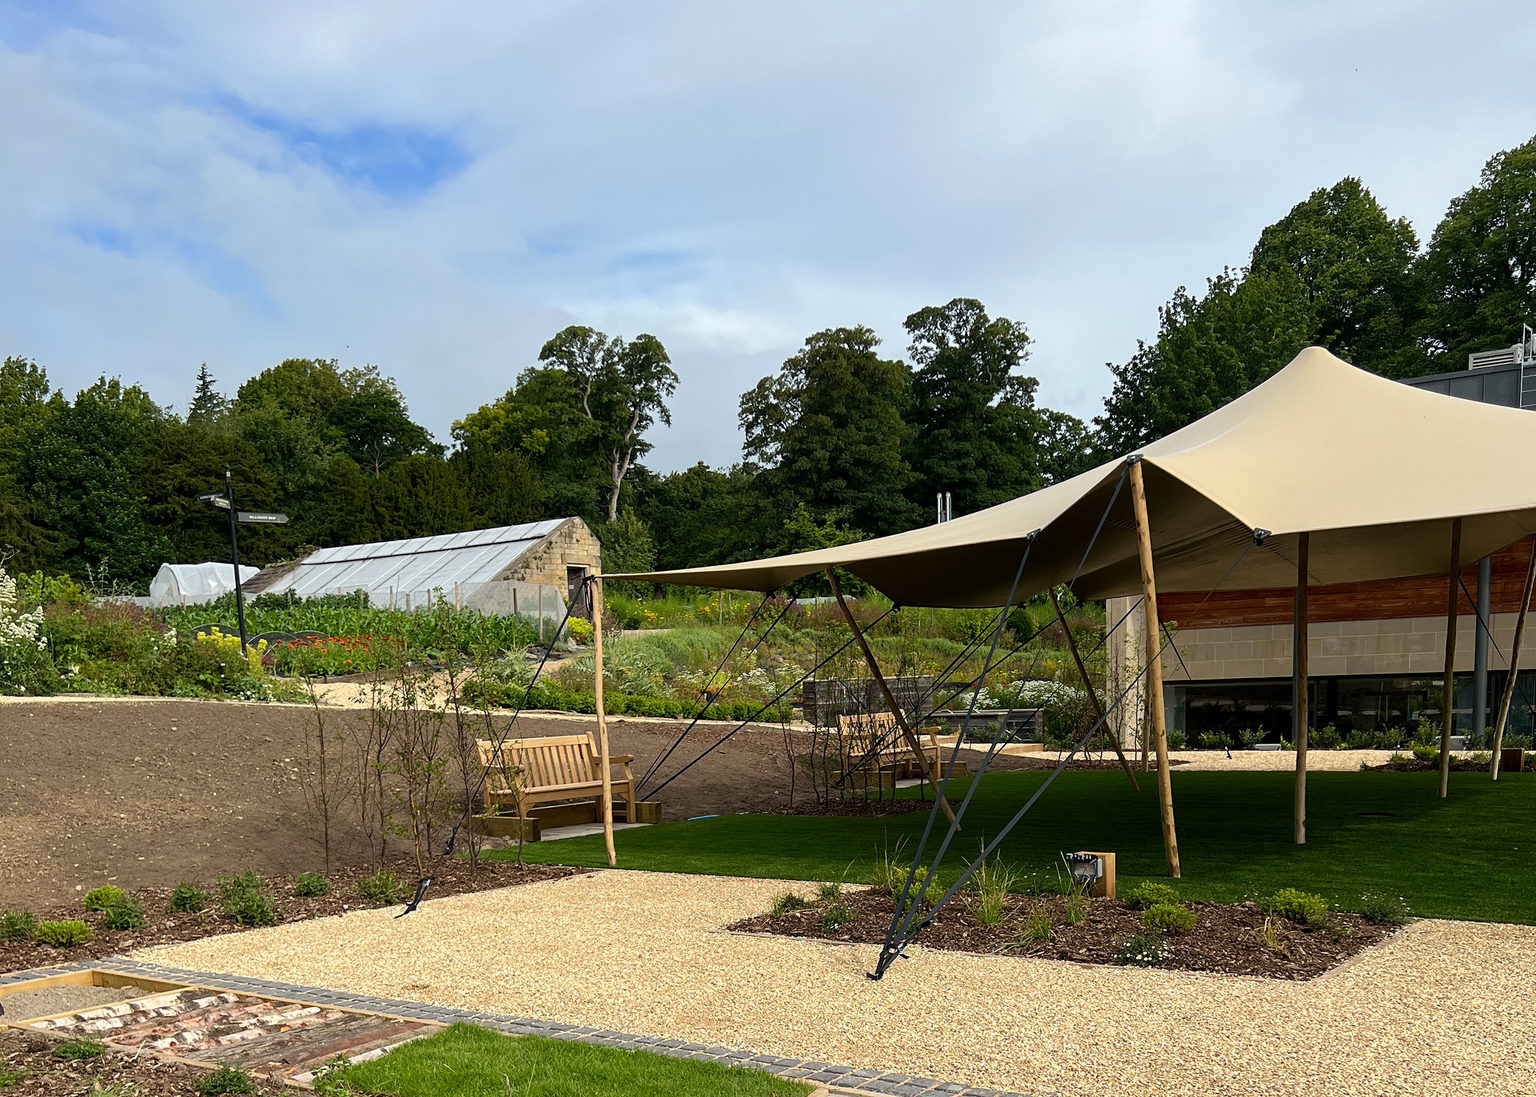 The outdoor Spa Garden at Swinton Country Club and Spa on the Swinton Estate in North Yorkshire